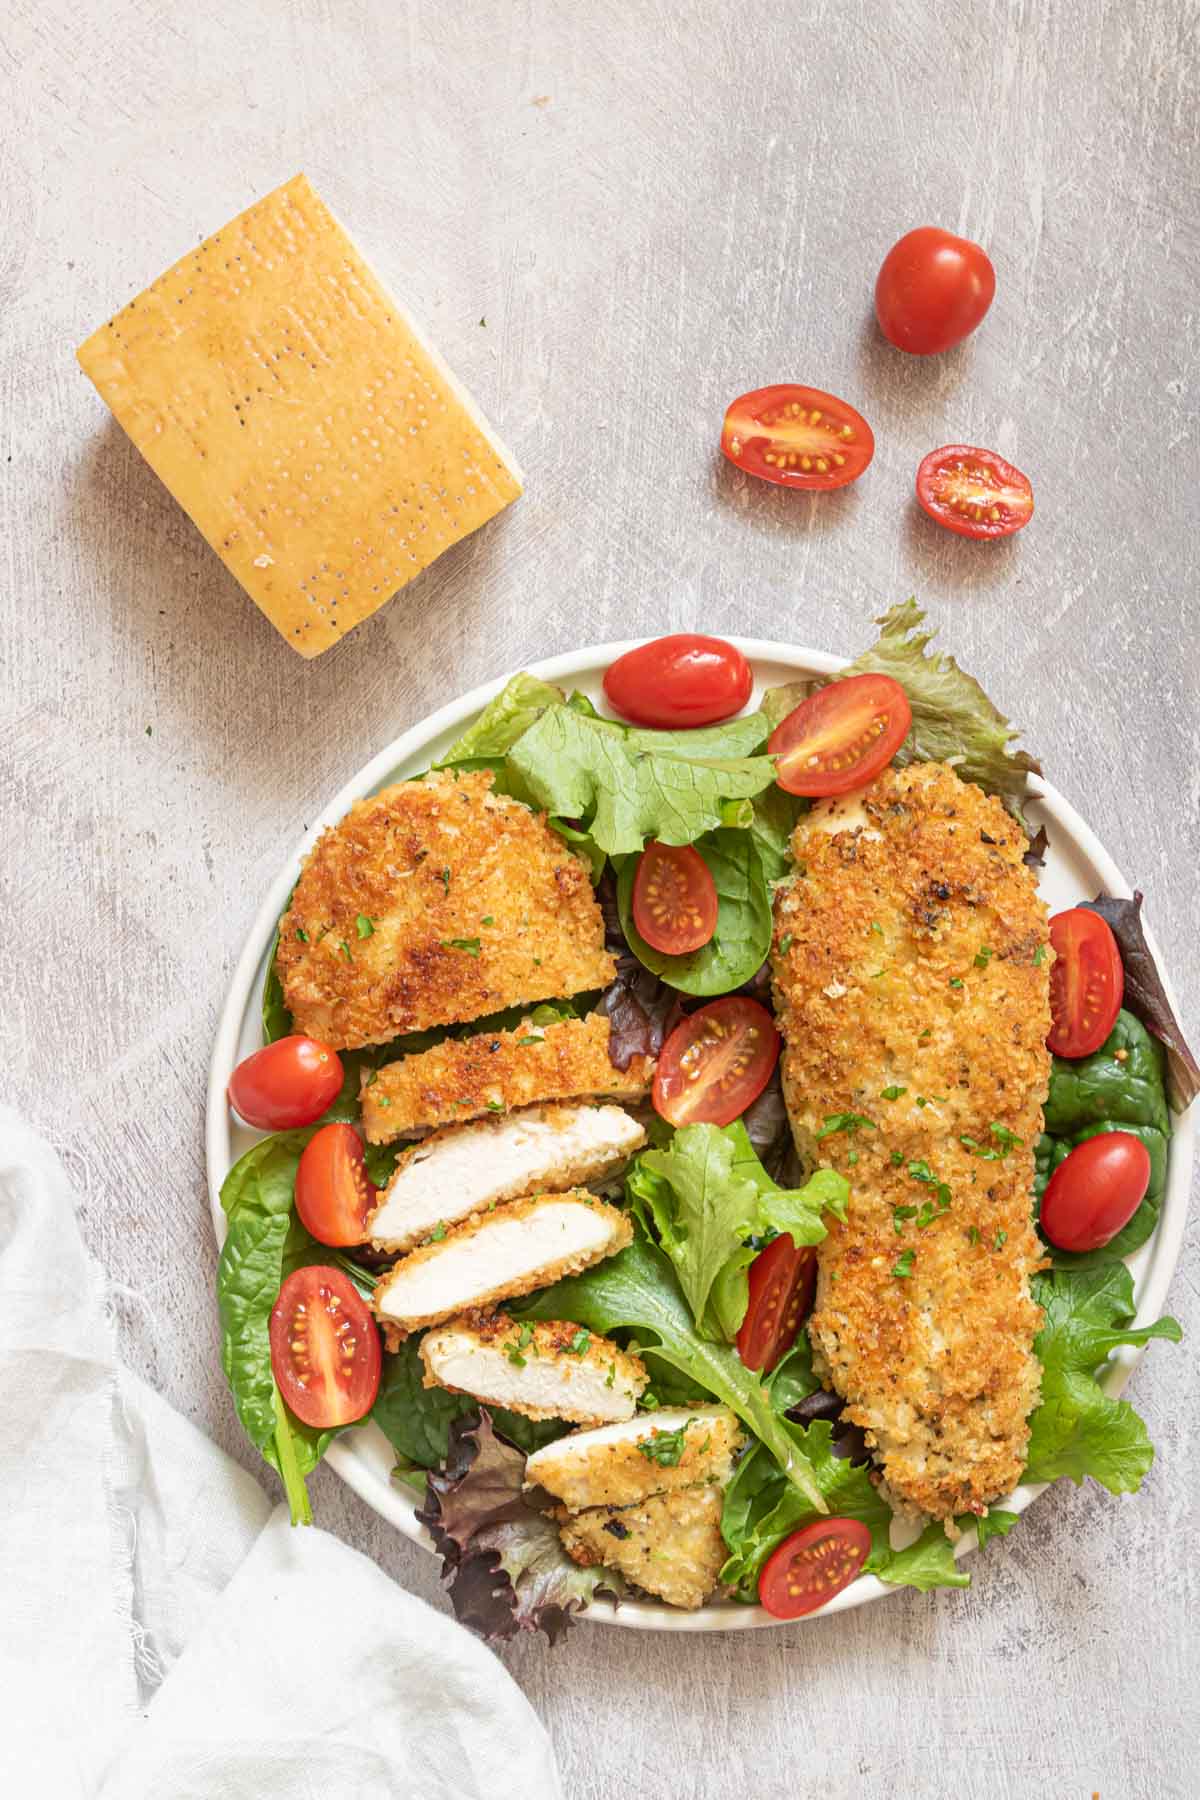 a serving of parmesan crusted chicken breast with a green salad on a white plate next to a wedge of parmigiano reggiano cheese